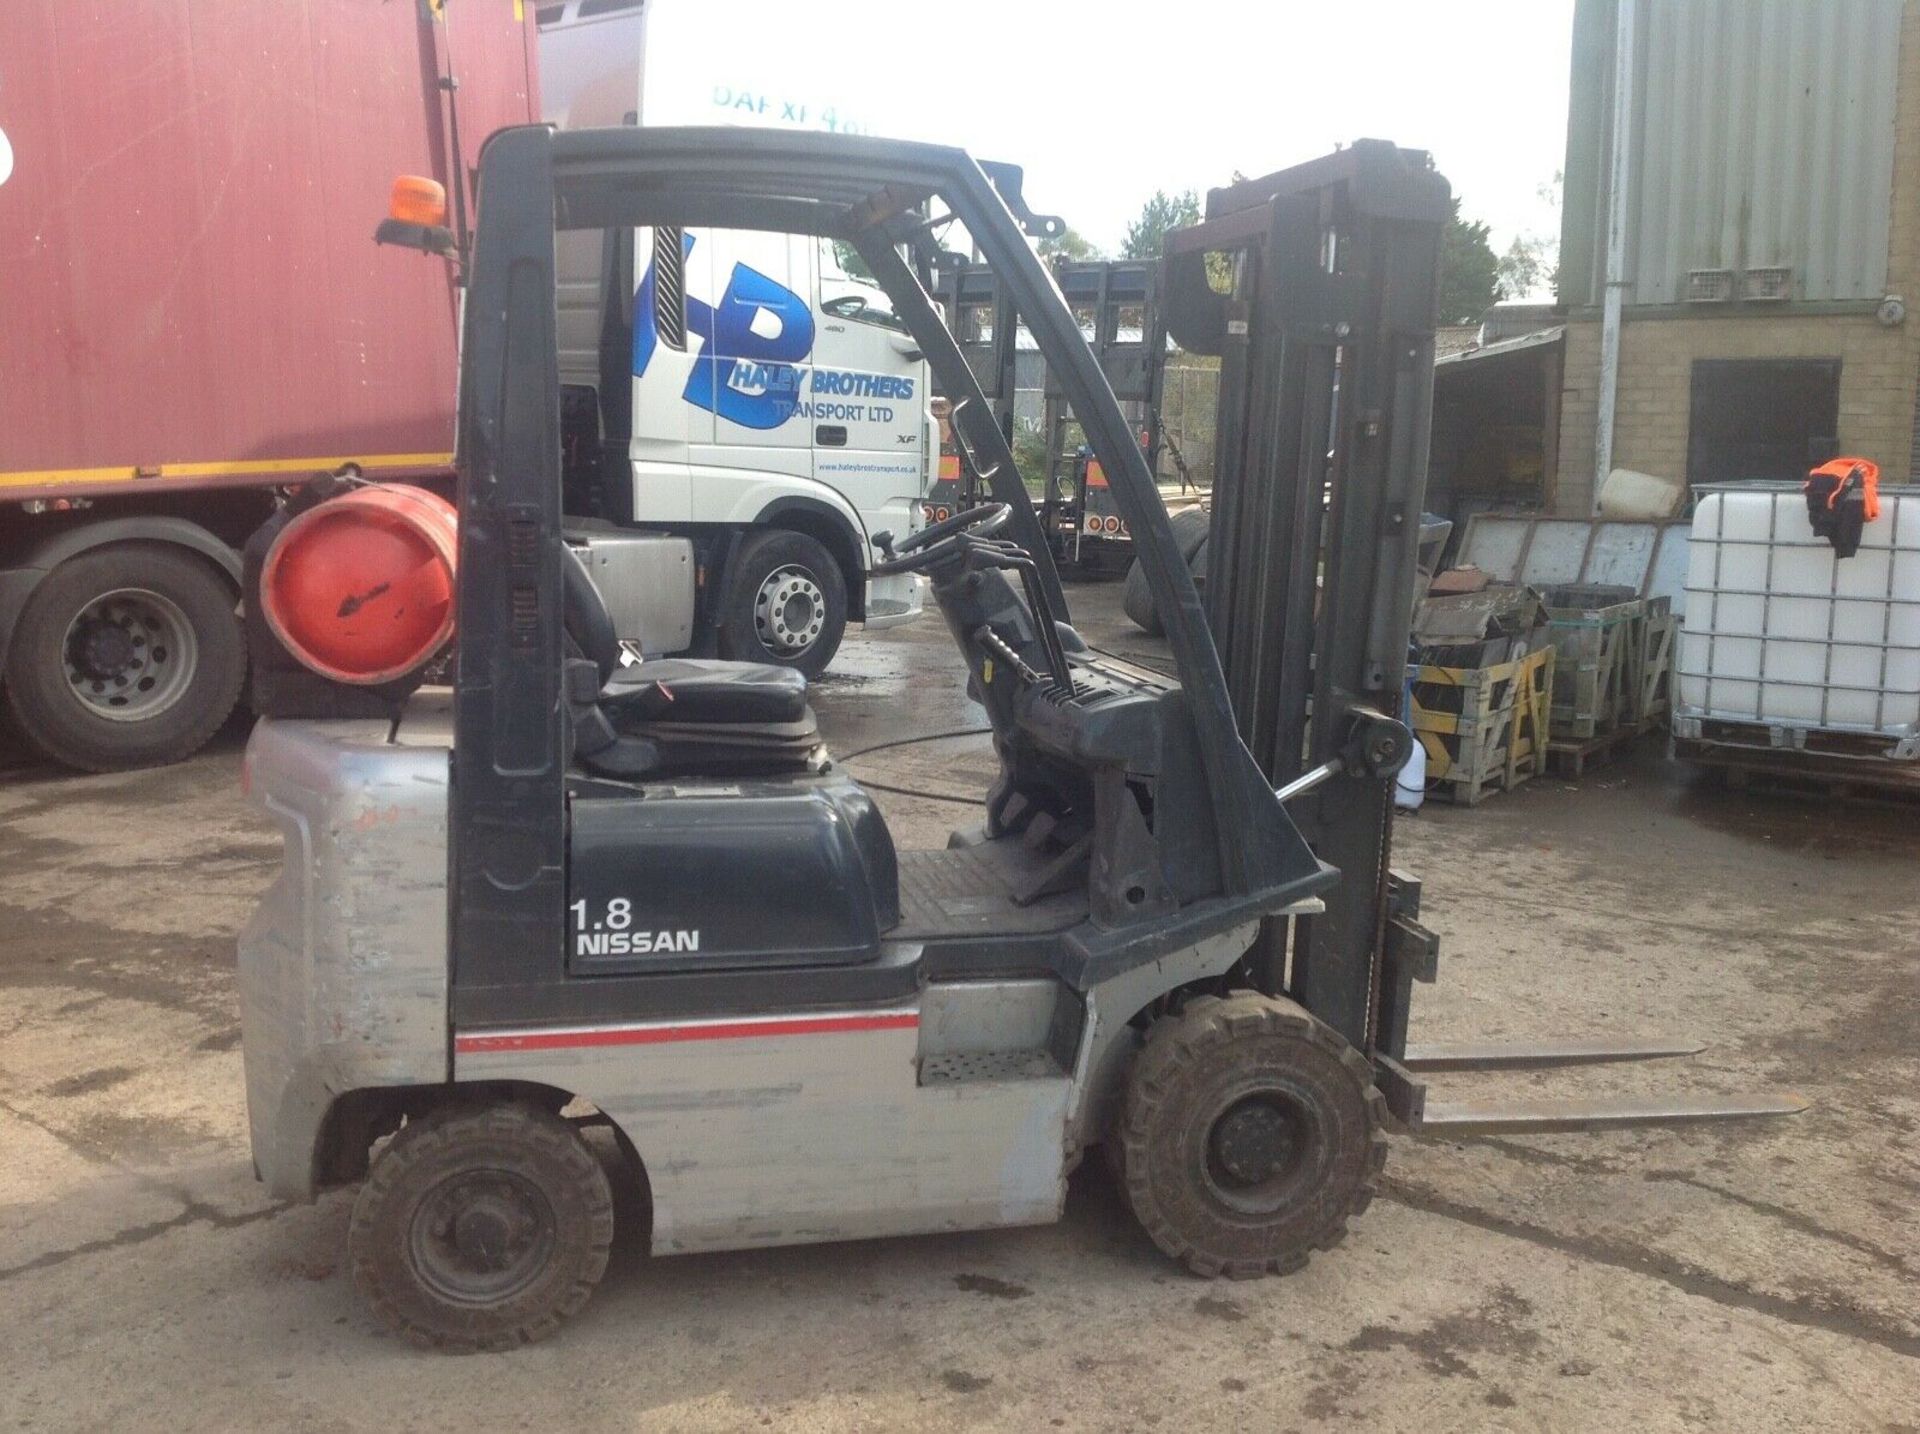 Nissan 1.8 ton gas forklift - Image 2 of 4